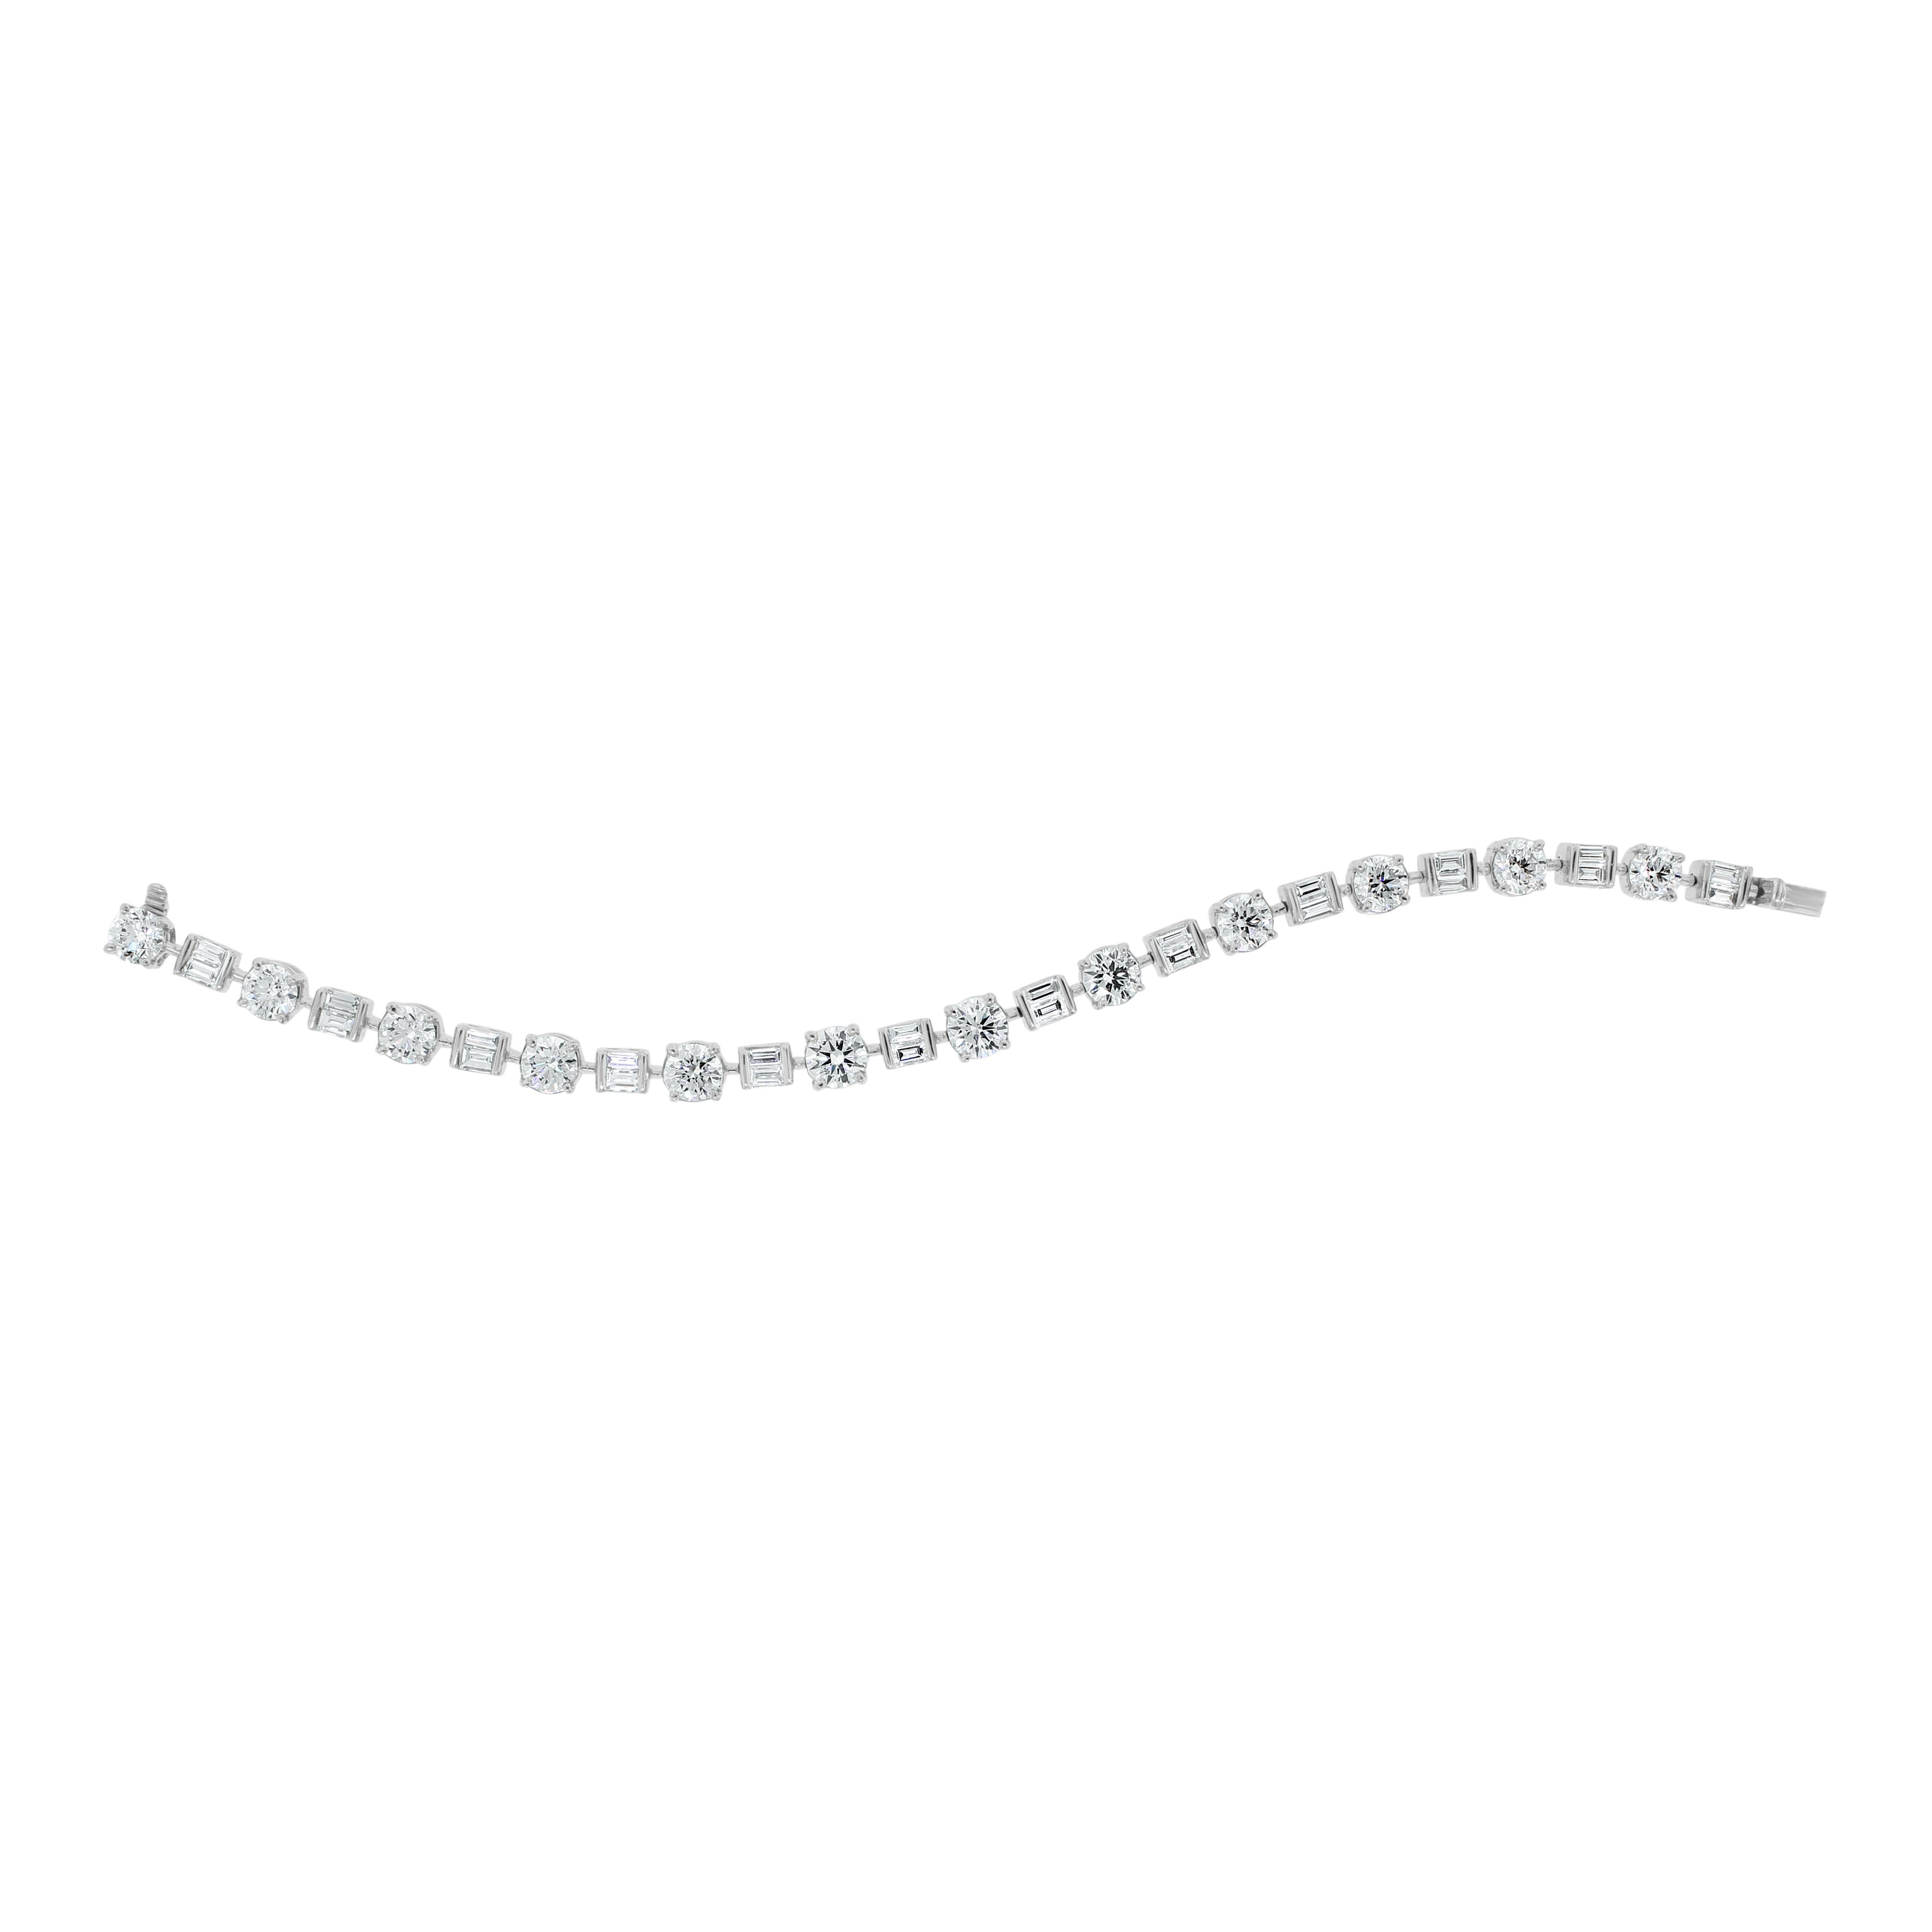 A diamond tennis bracelet is the most elegant and classic piece of evergreen jewelry. It is feminine, comfortable and accentuates a woman's wrist with brilliance and sparkles. All our bracelets have two locks for added security.

Diamond Shapes: